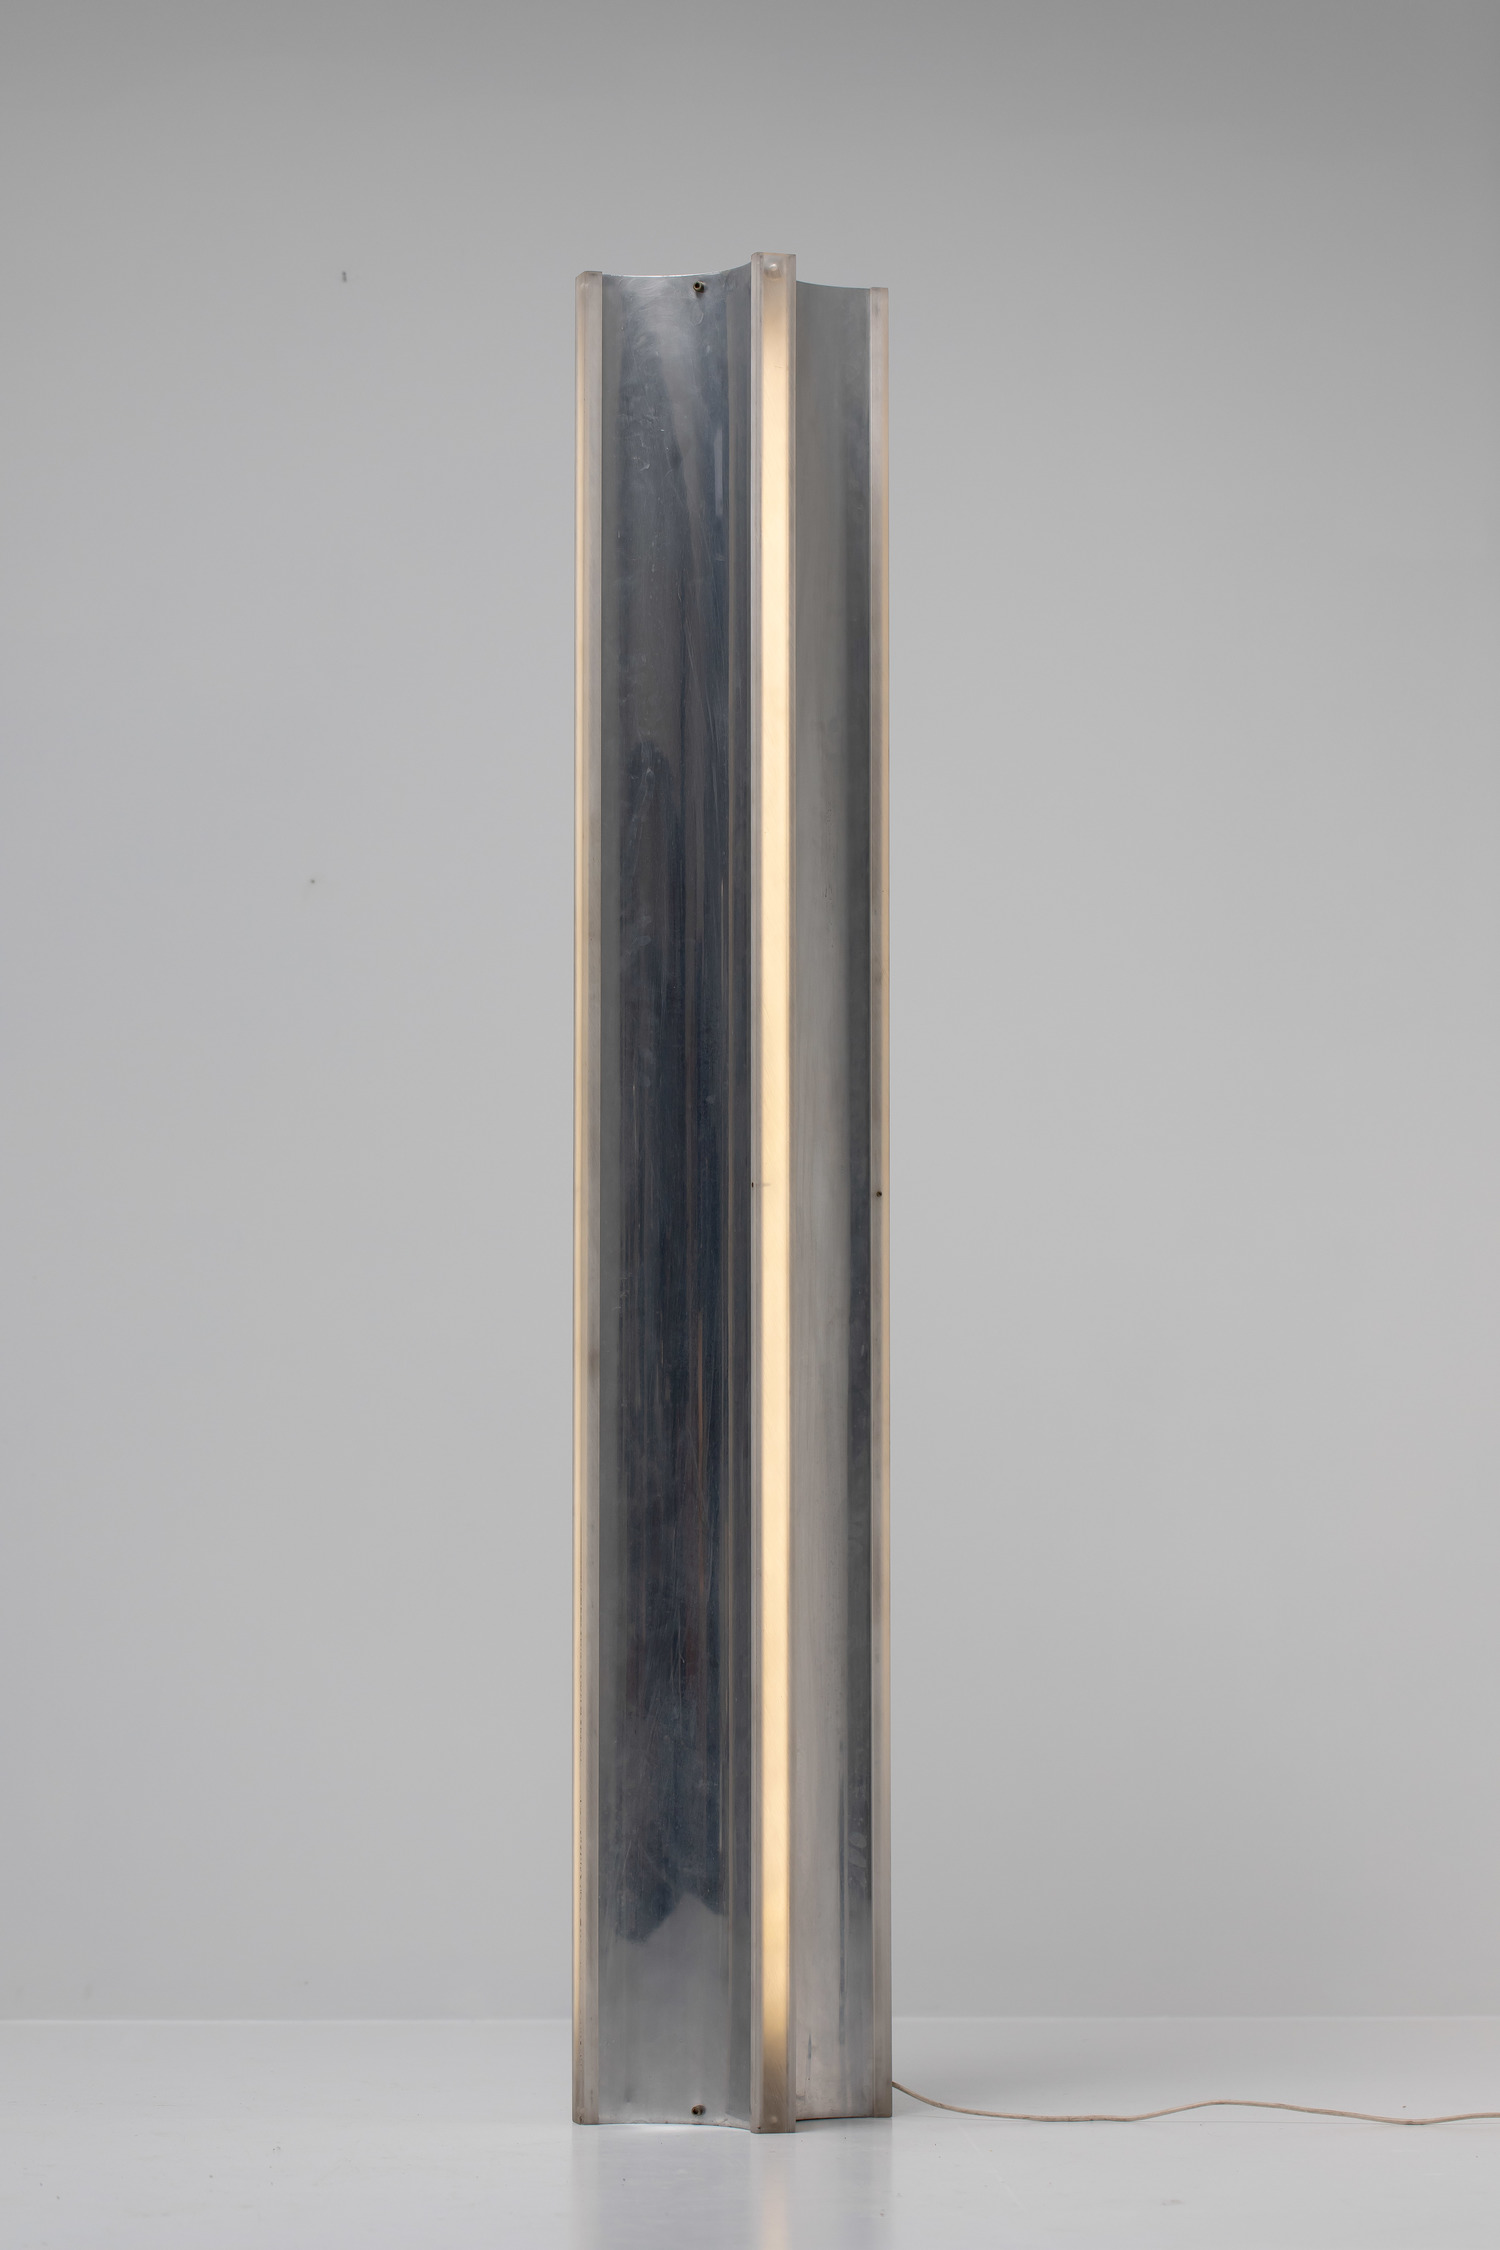 Azimuth floor lamp by Fabrizio Cocchia and Gianfranco Fini for New Lamp